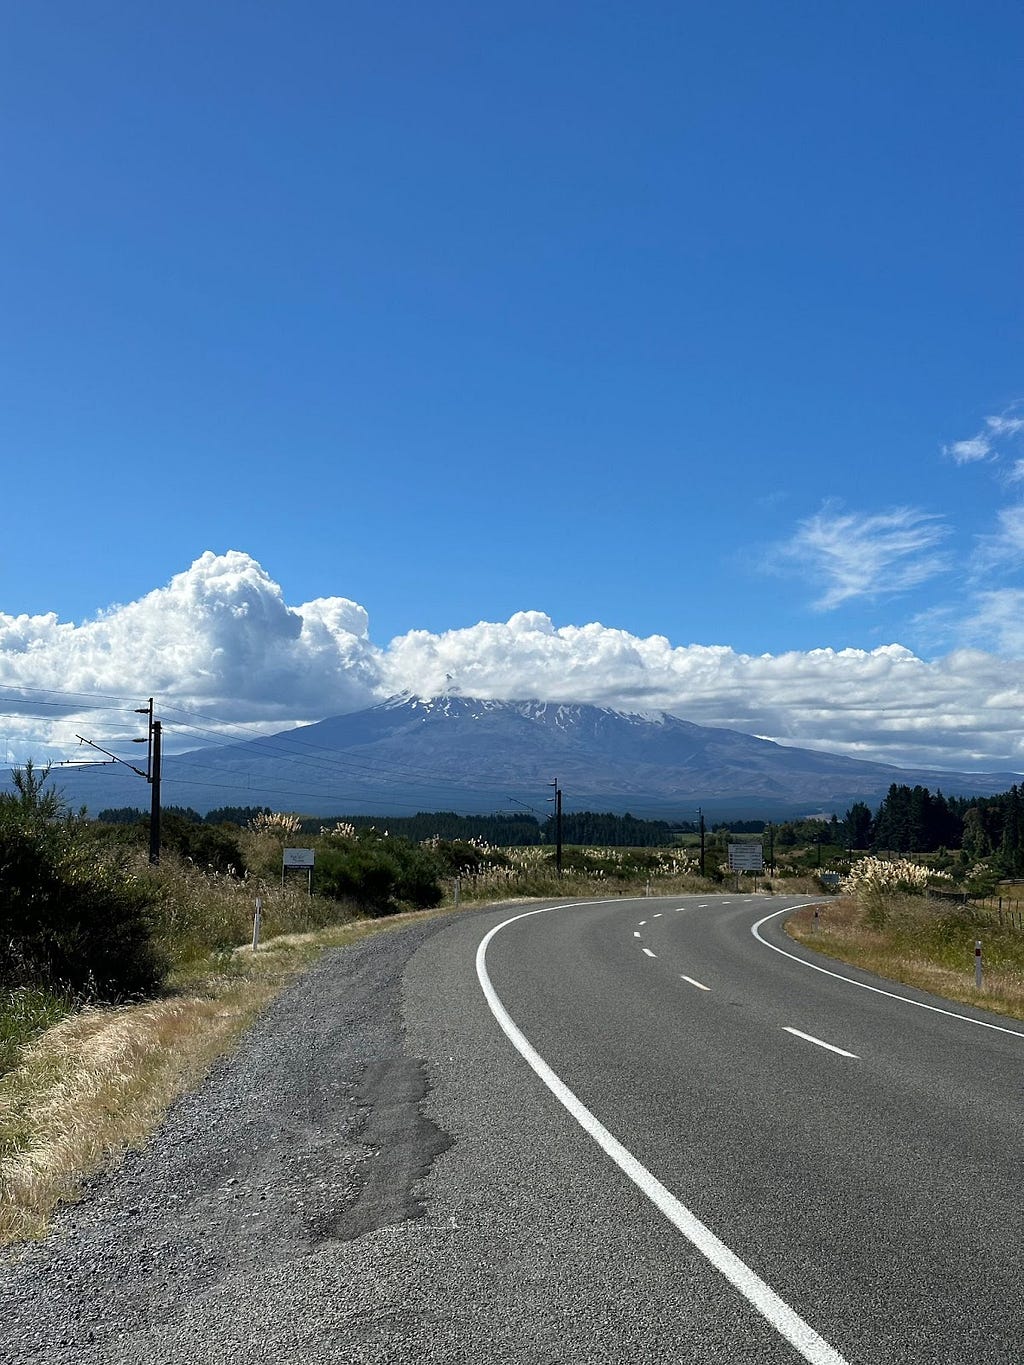 Road curving right into distance with mountains and clouds.